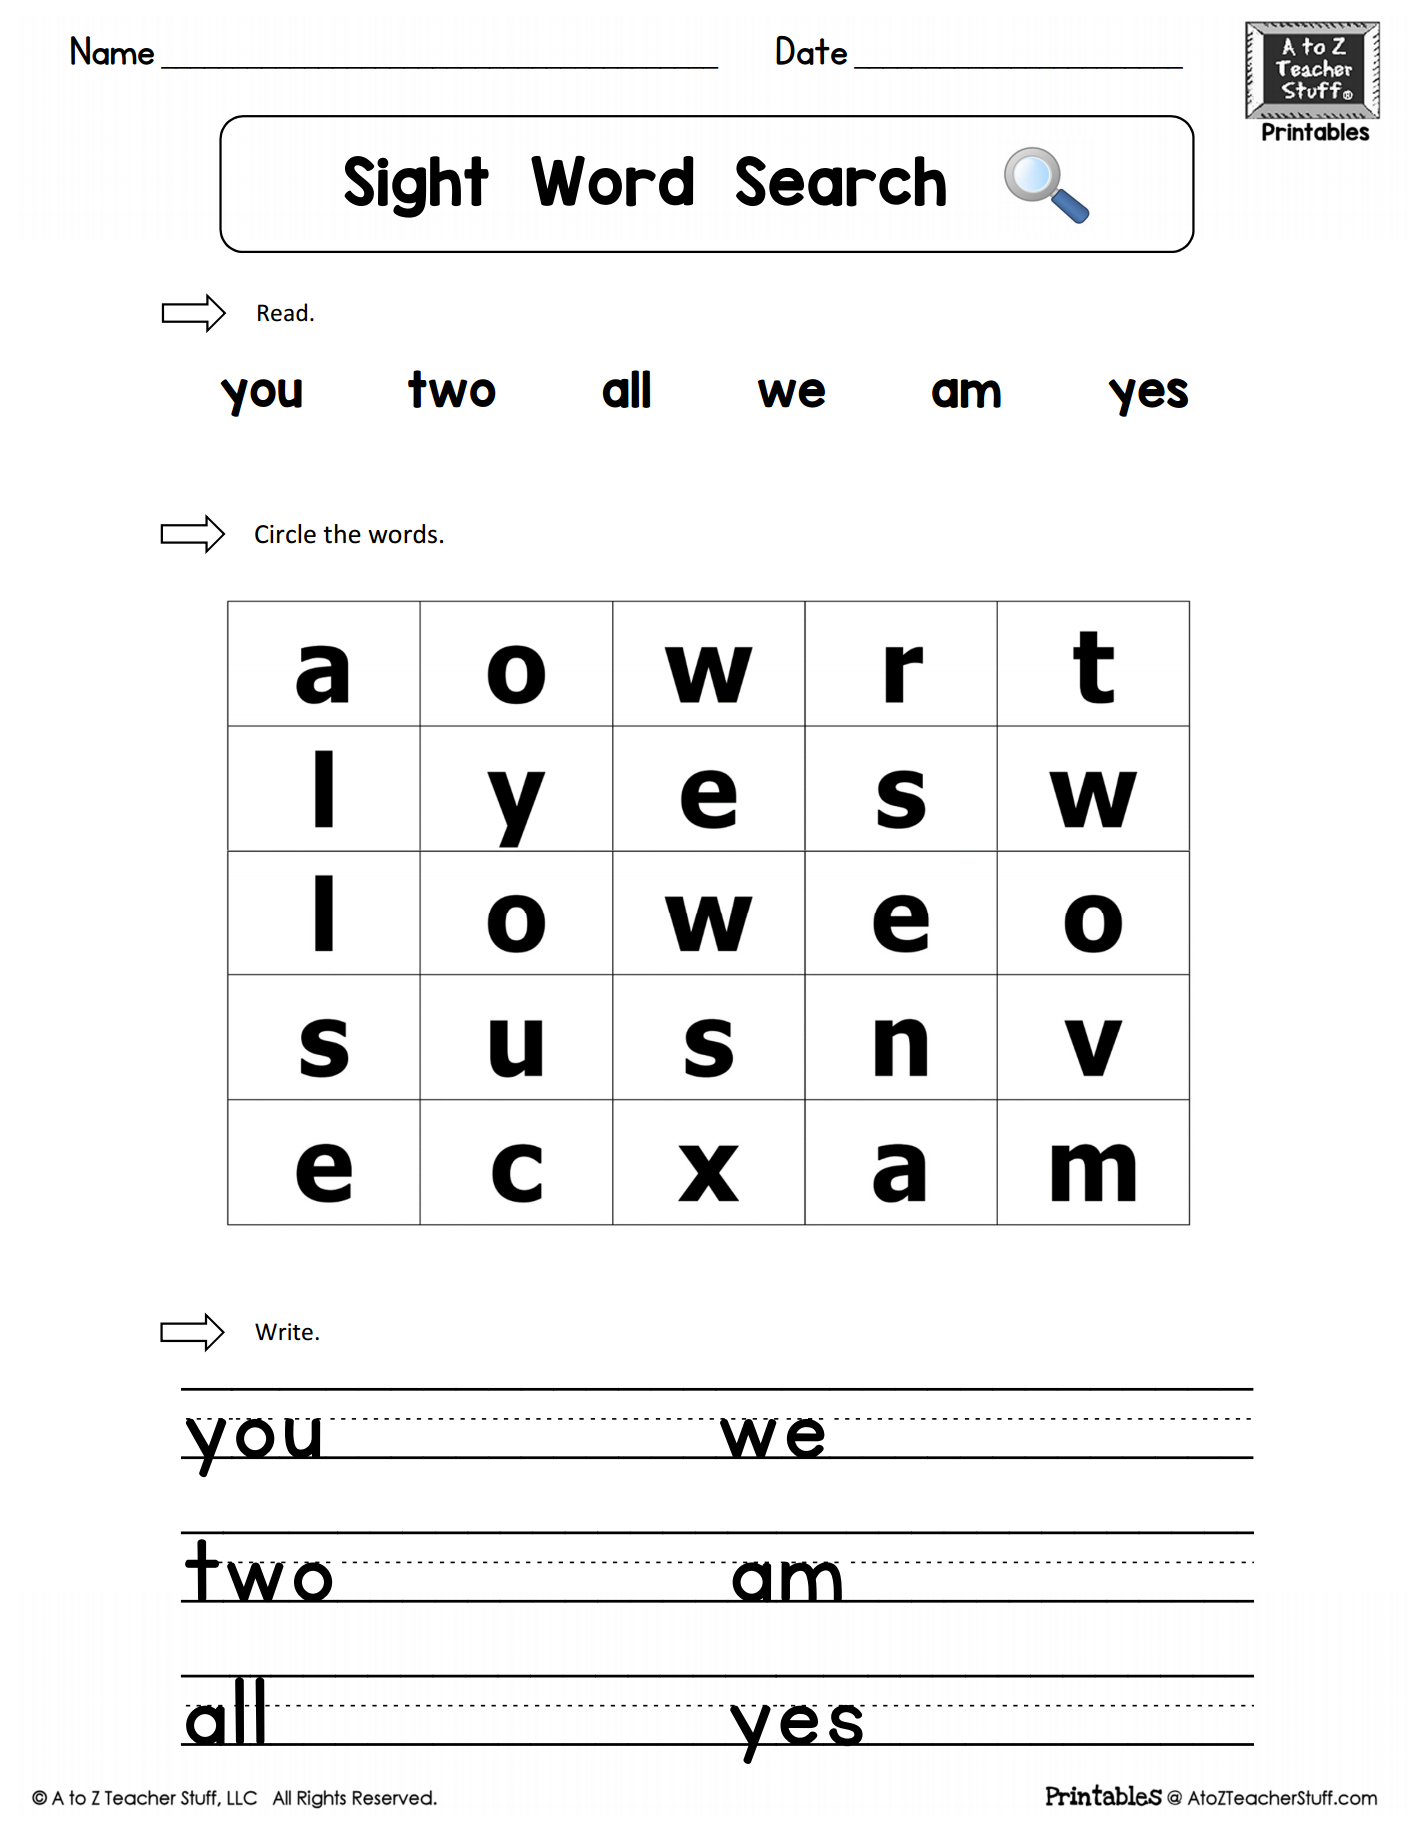 This Is A Sight Word Worksheet For The Words look And like You Printable Sight Word